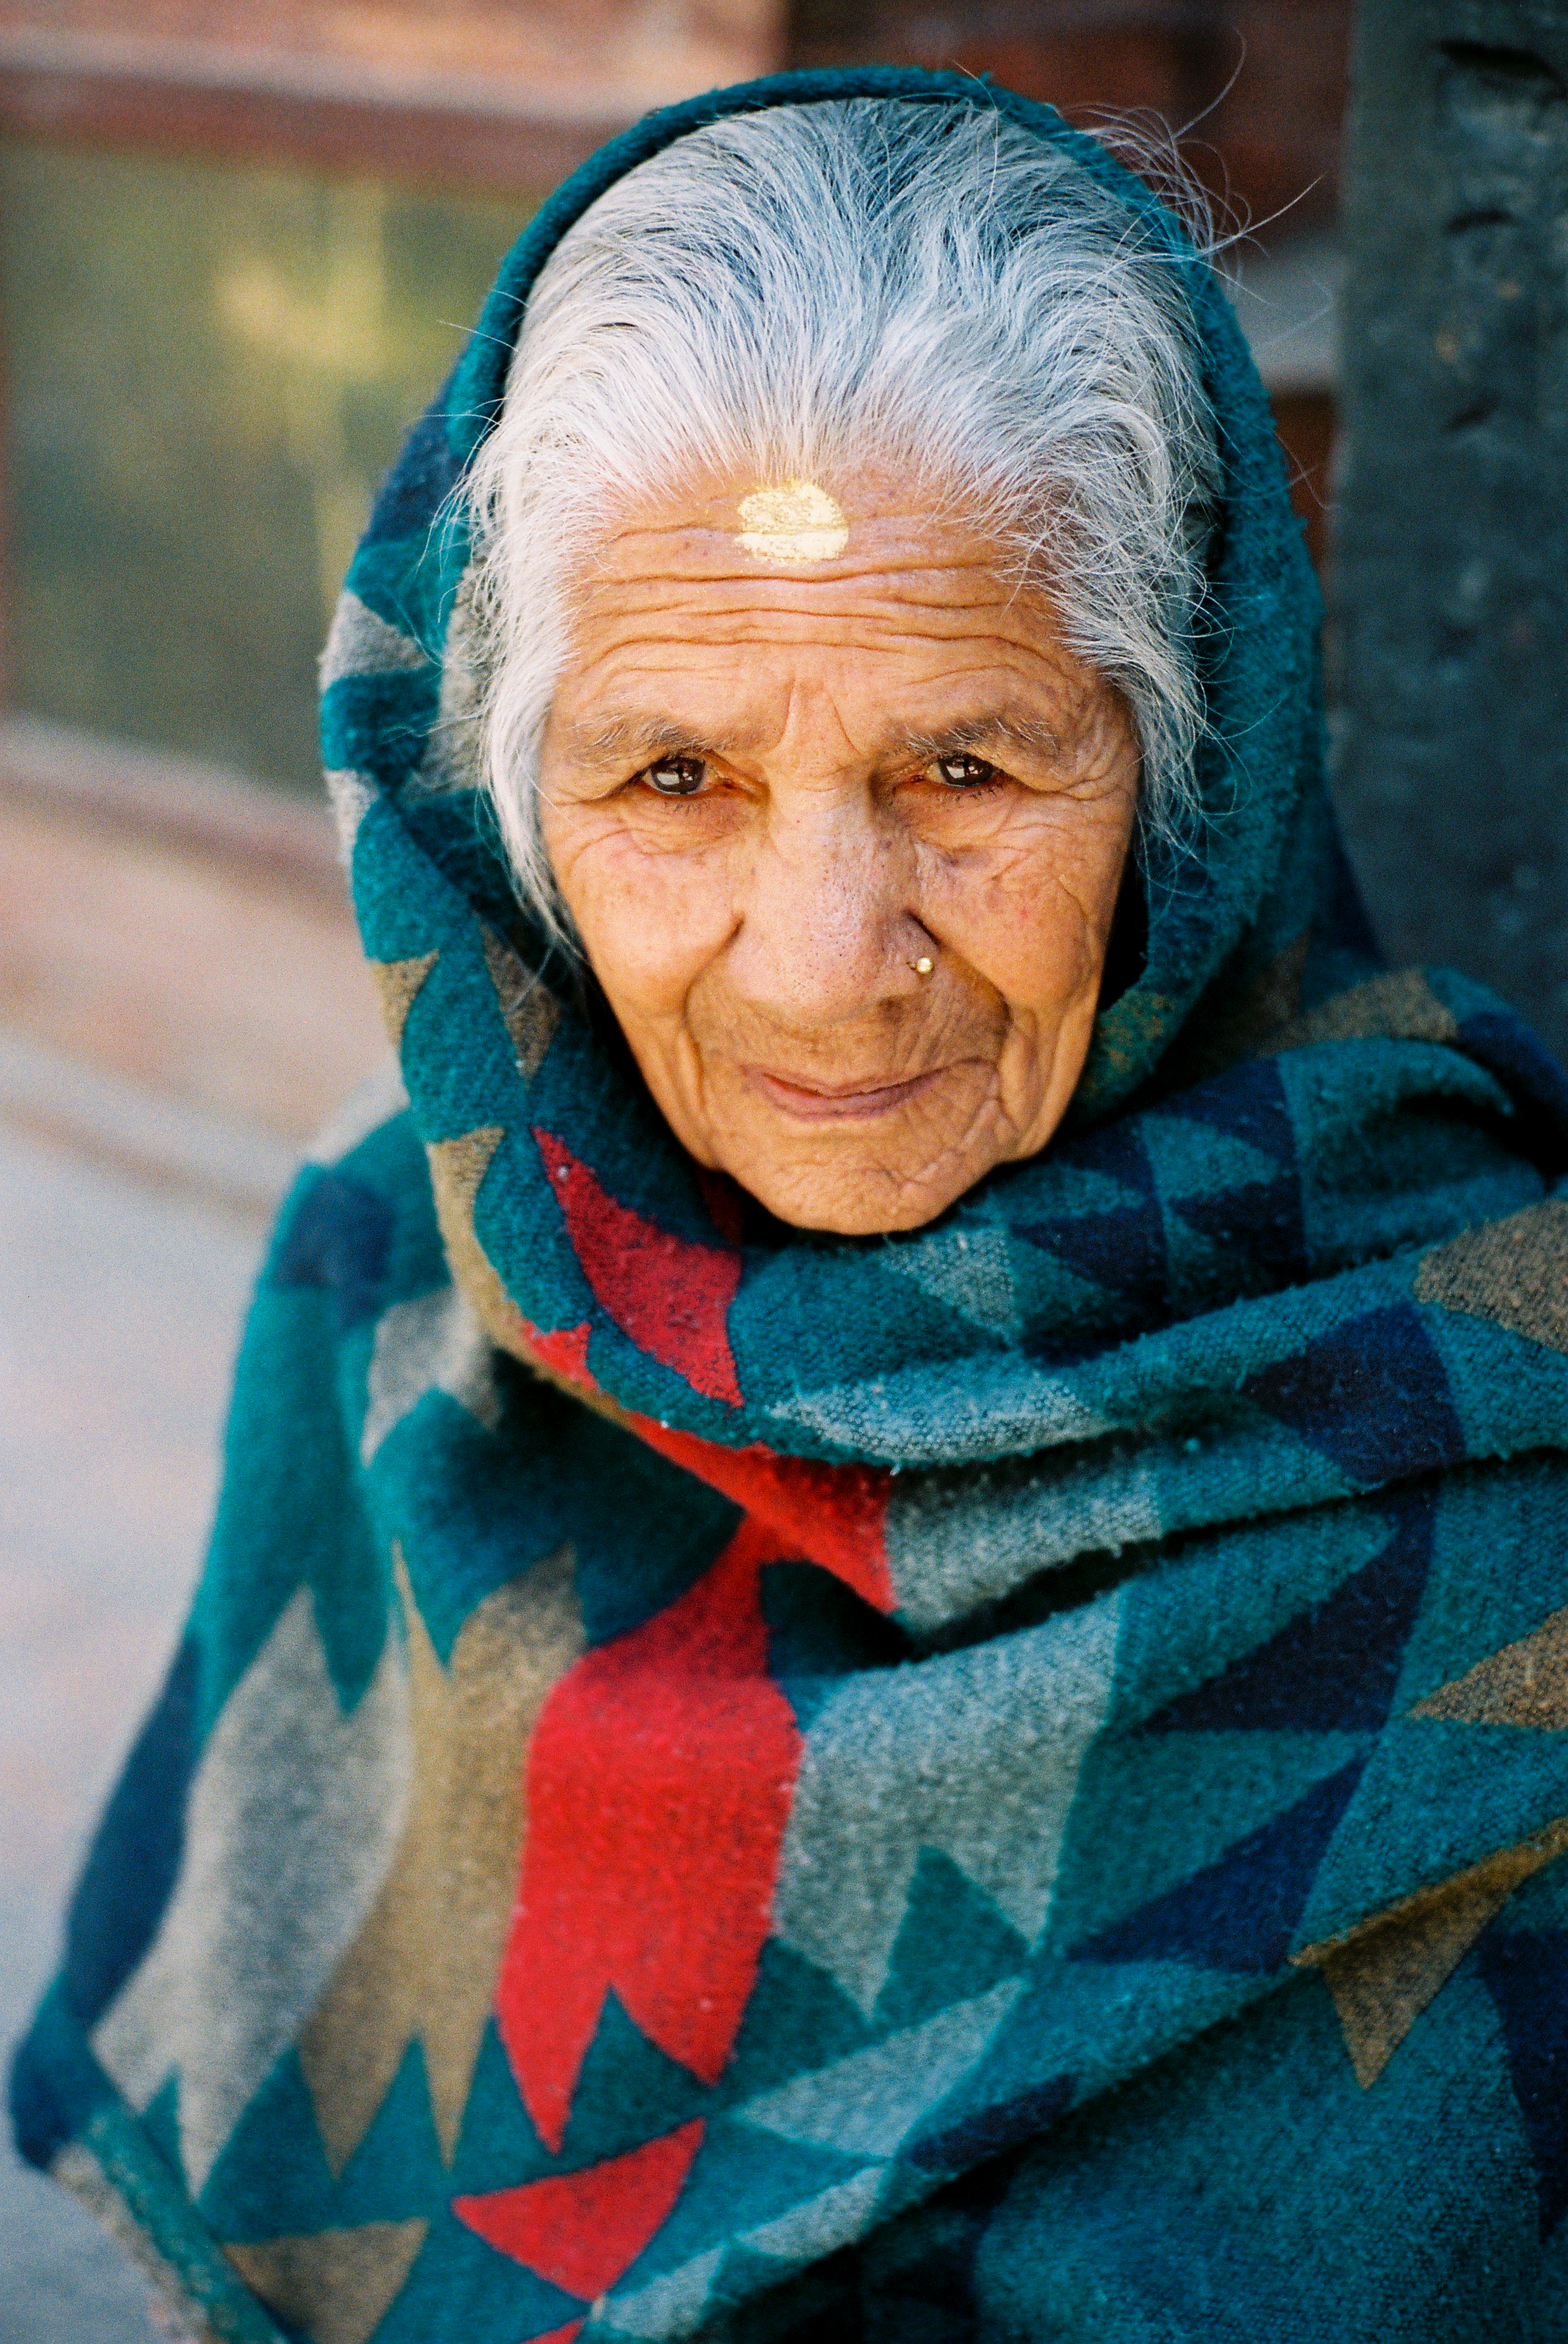  Faces of Nepal - Leica M6 